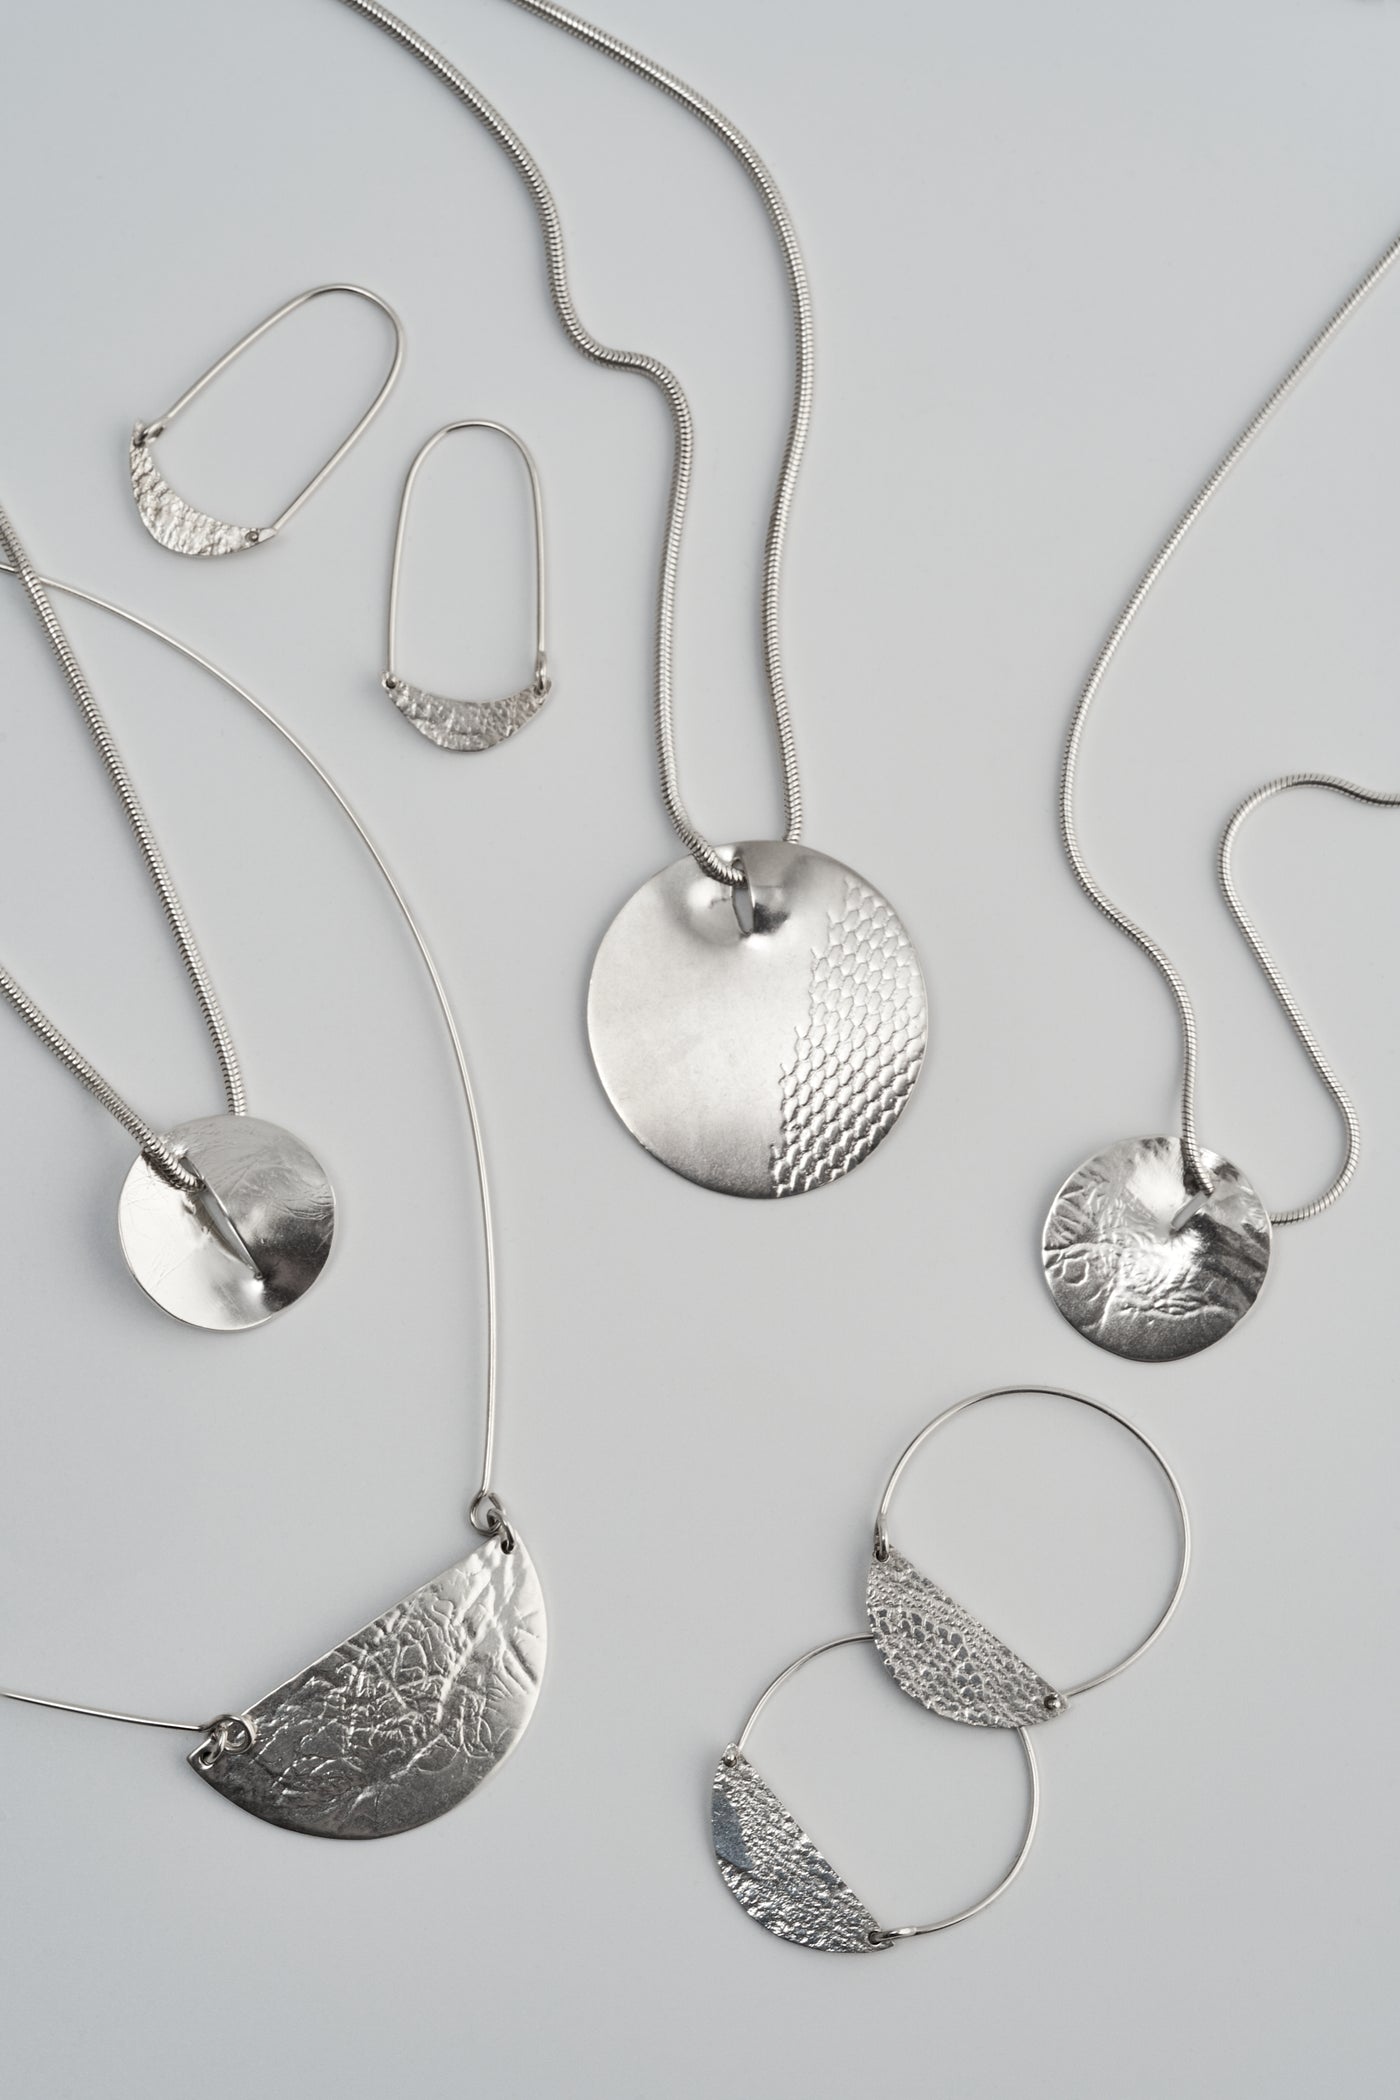 An image of the Lace and Lichen collection, including the Crescent Moon Earrings